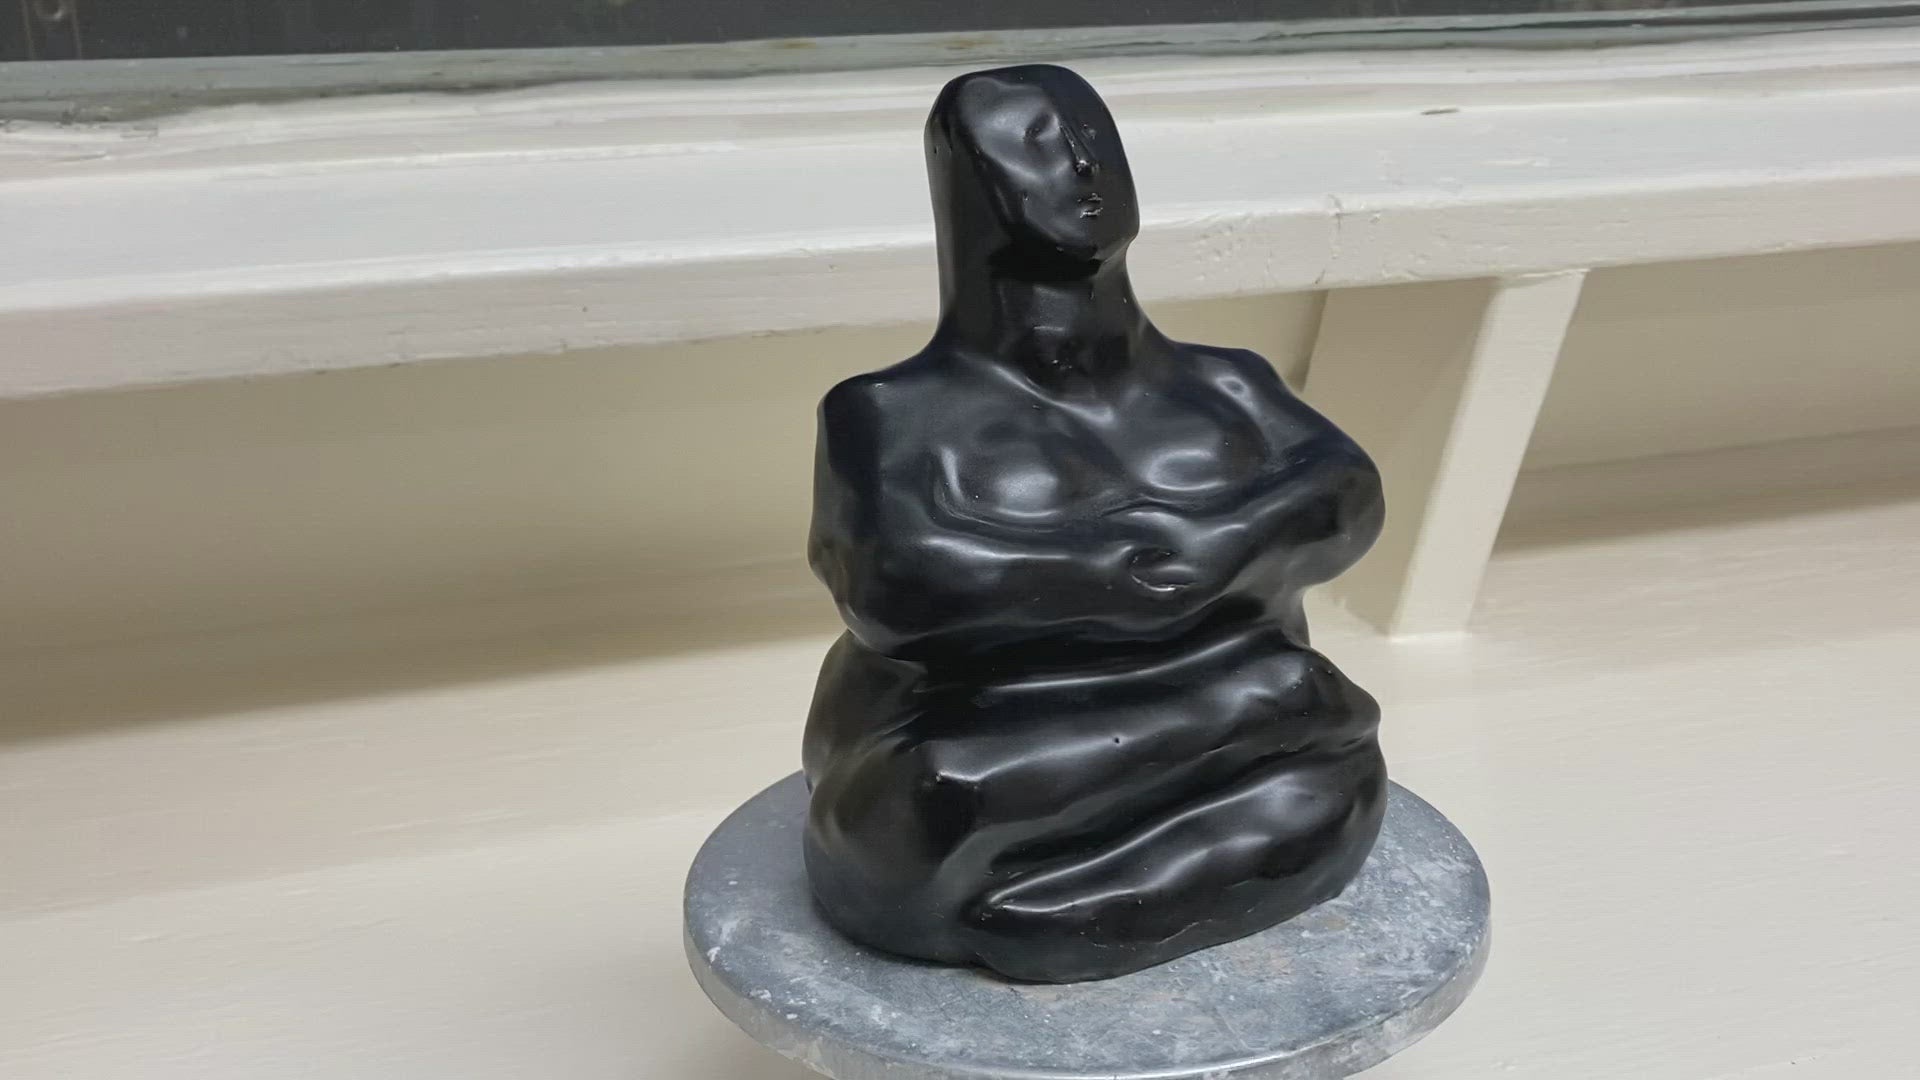 Sumi e Sculpture, Zen style, “Meditating Madonna”- by Marilyn Wells